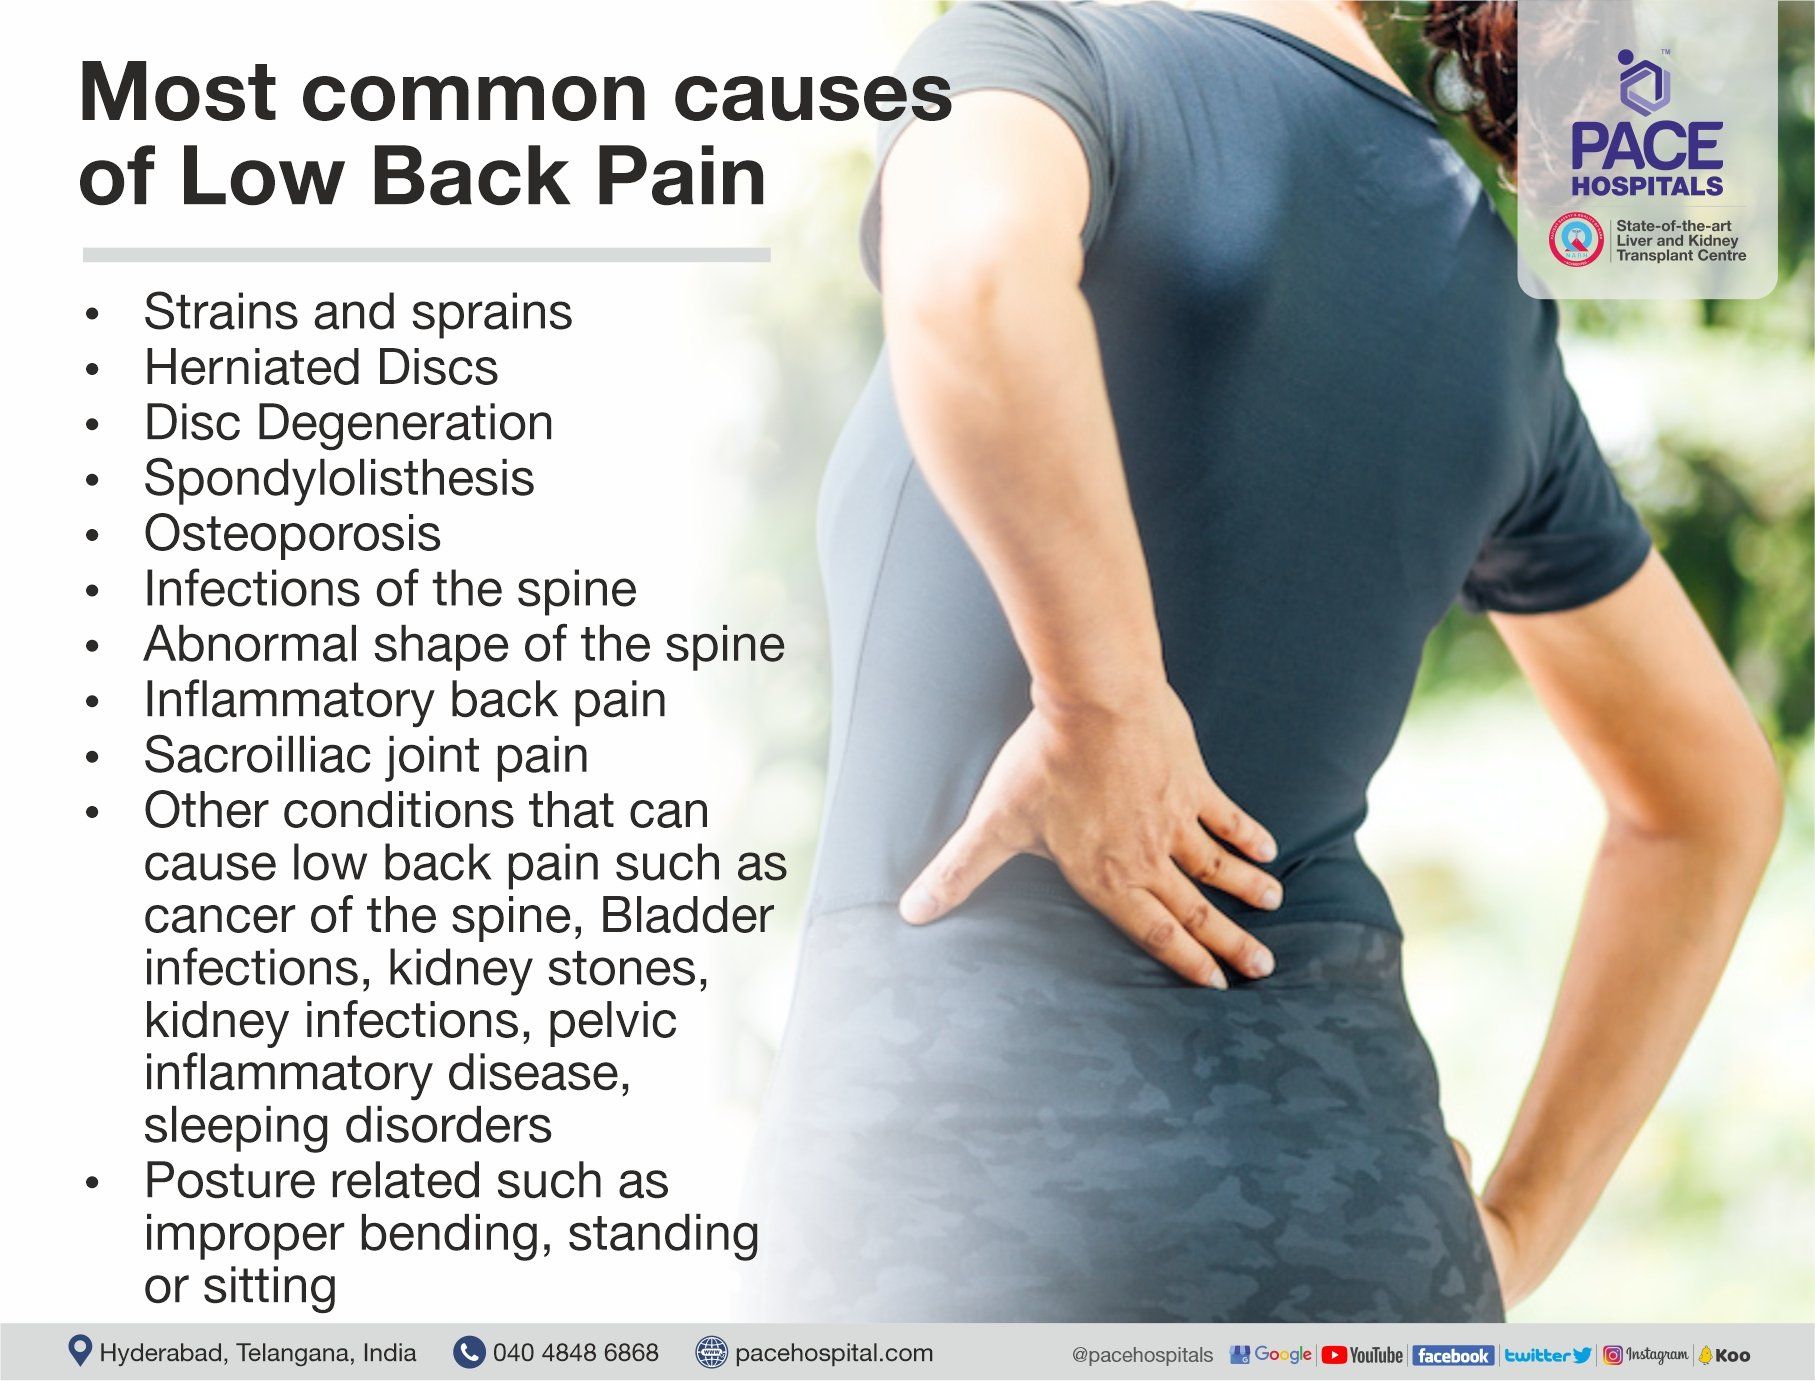 Most common causes of low back pain | lower back pain causes Pace Hospitals